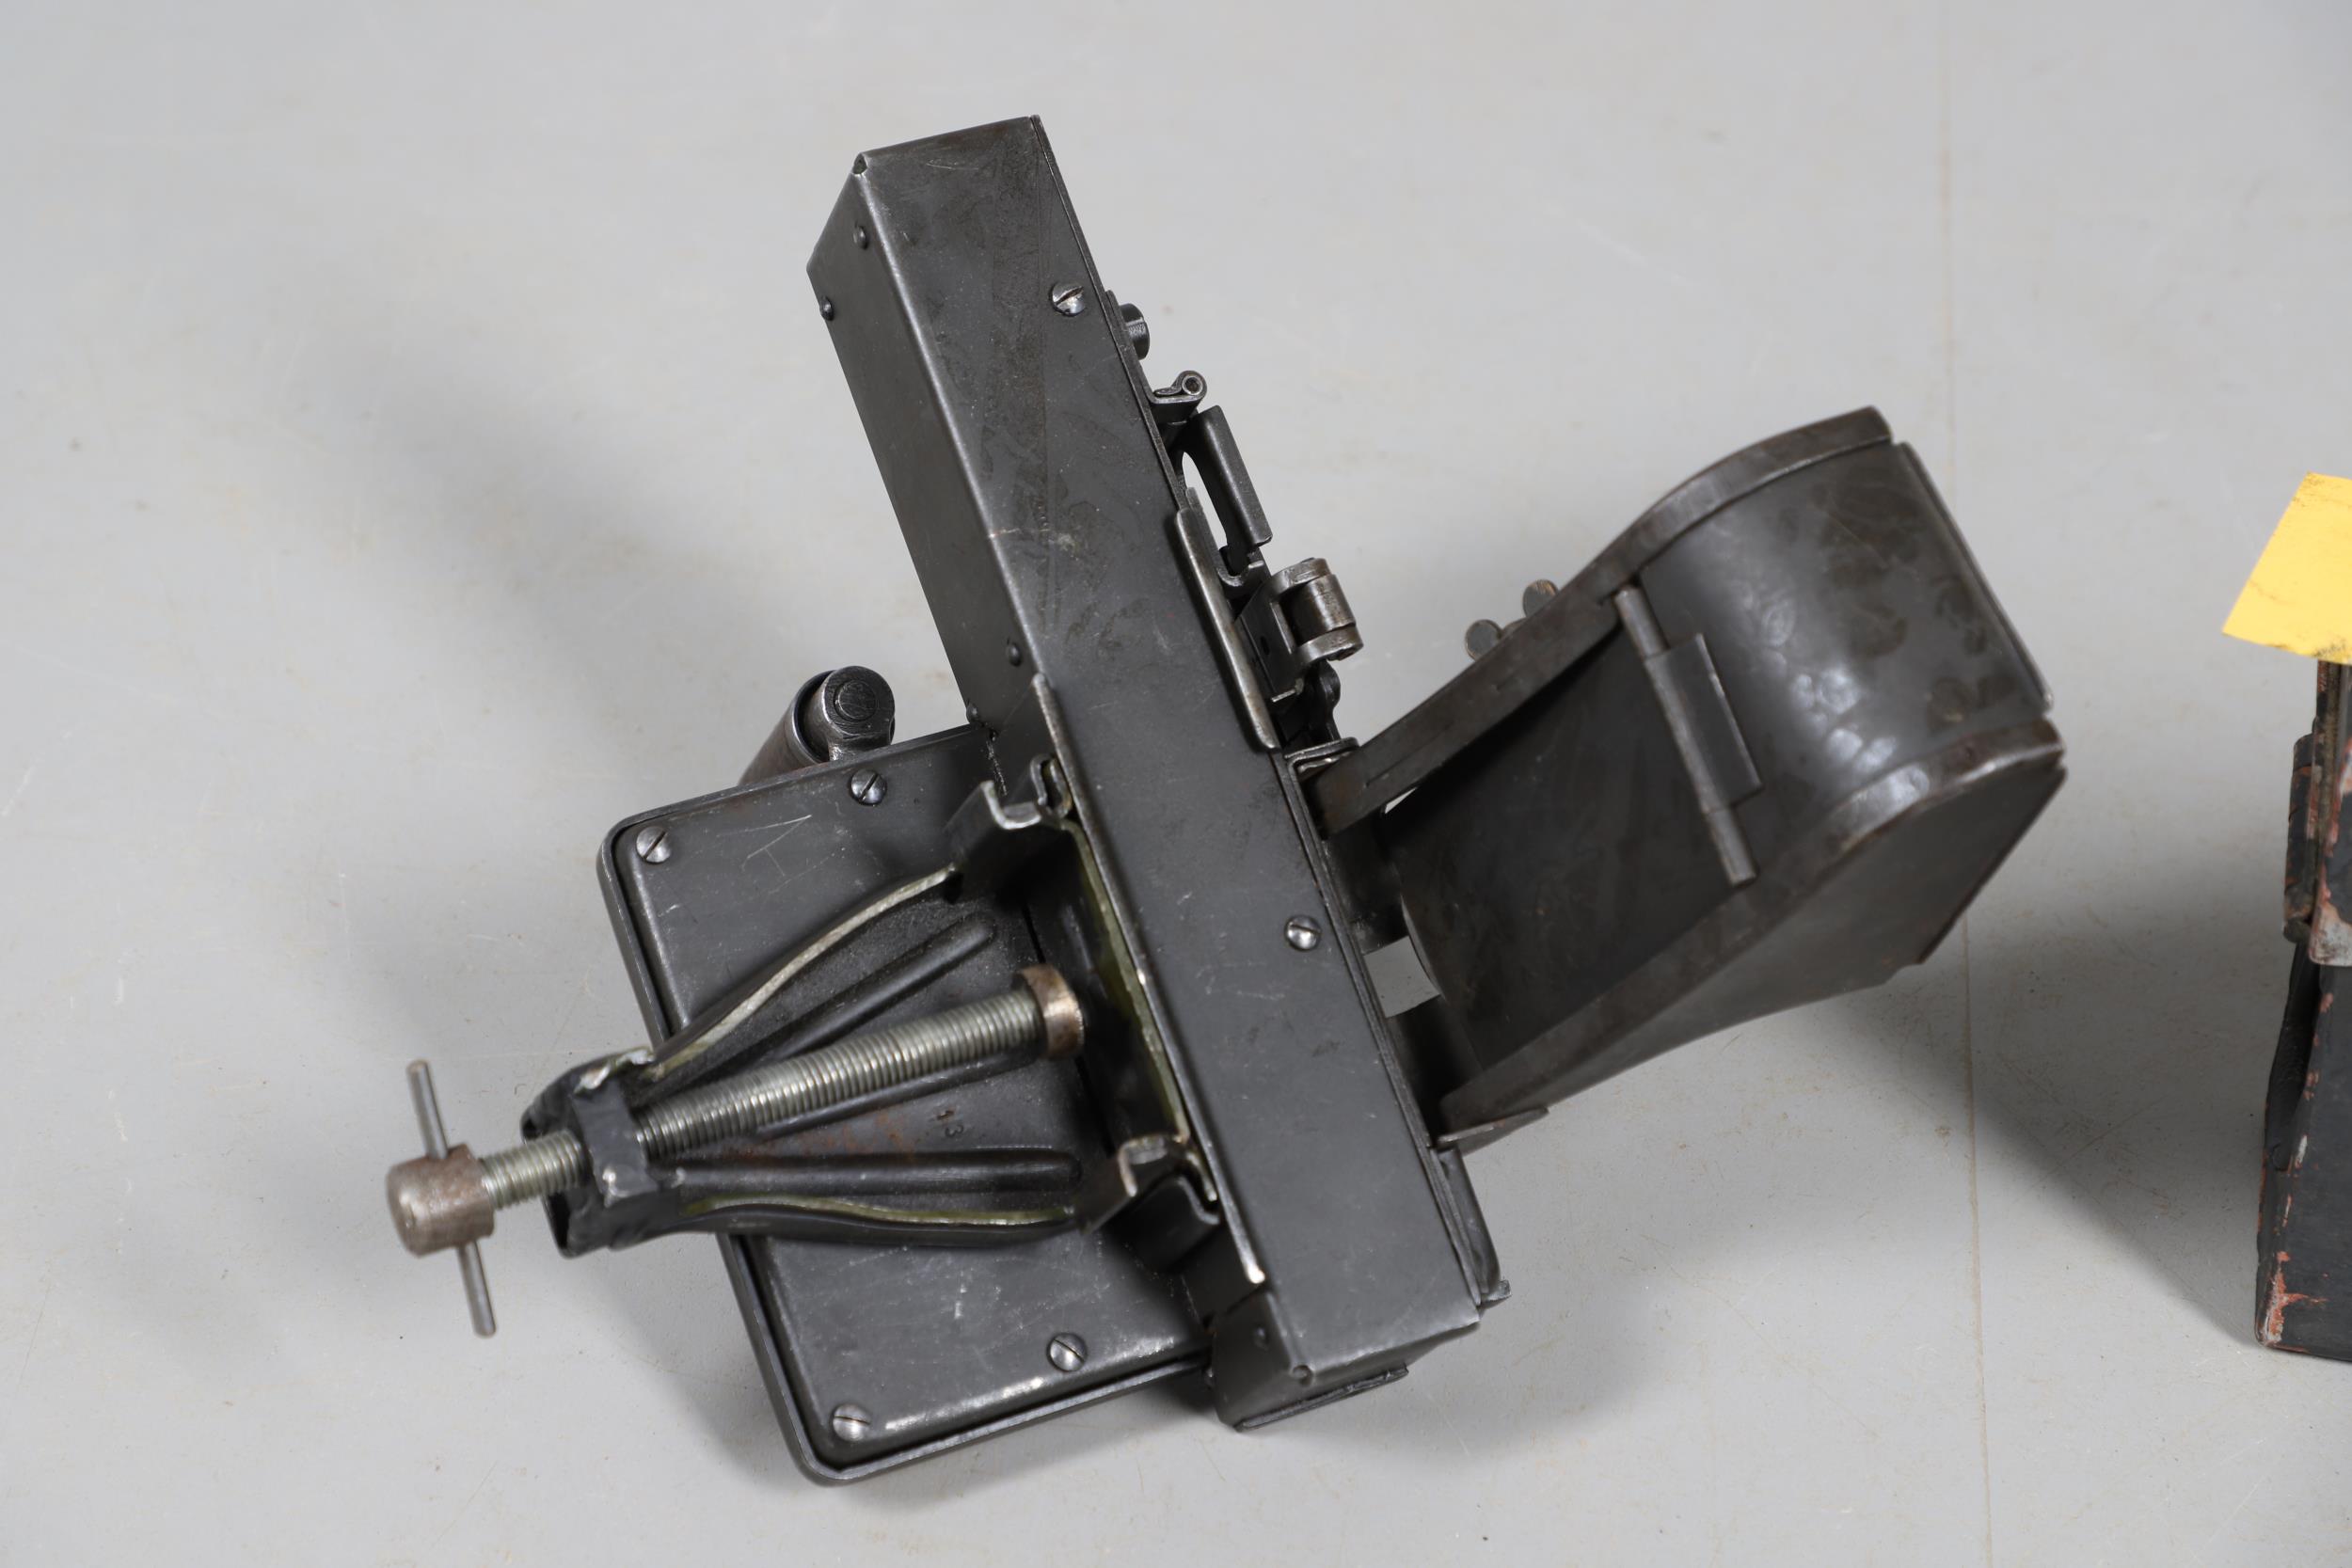 A 42/59 MACHINE GUN BELT LOADER AND ANOTHER SIMILAR. - Image 5 of 14